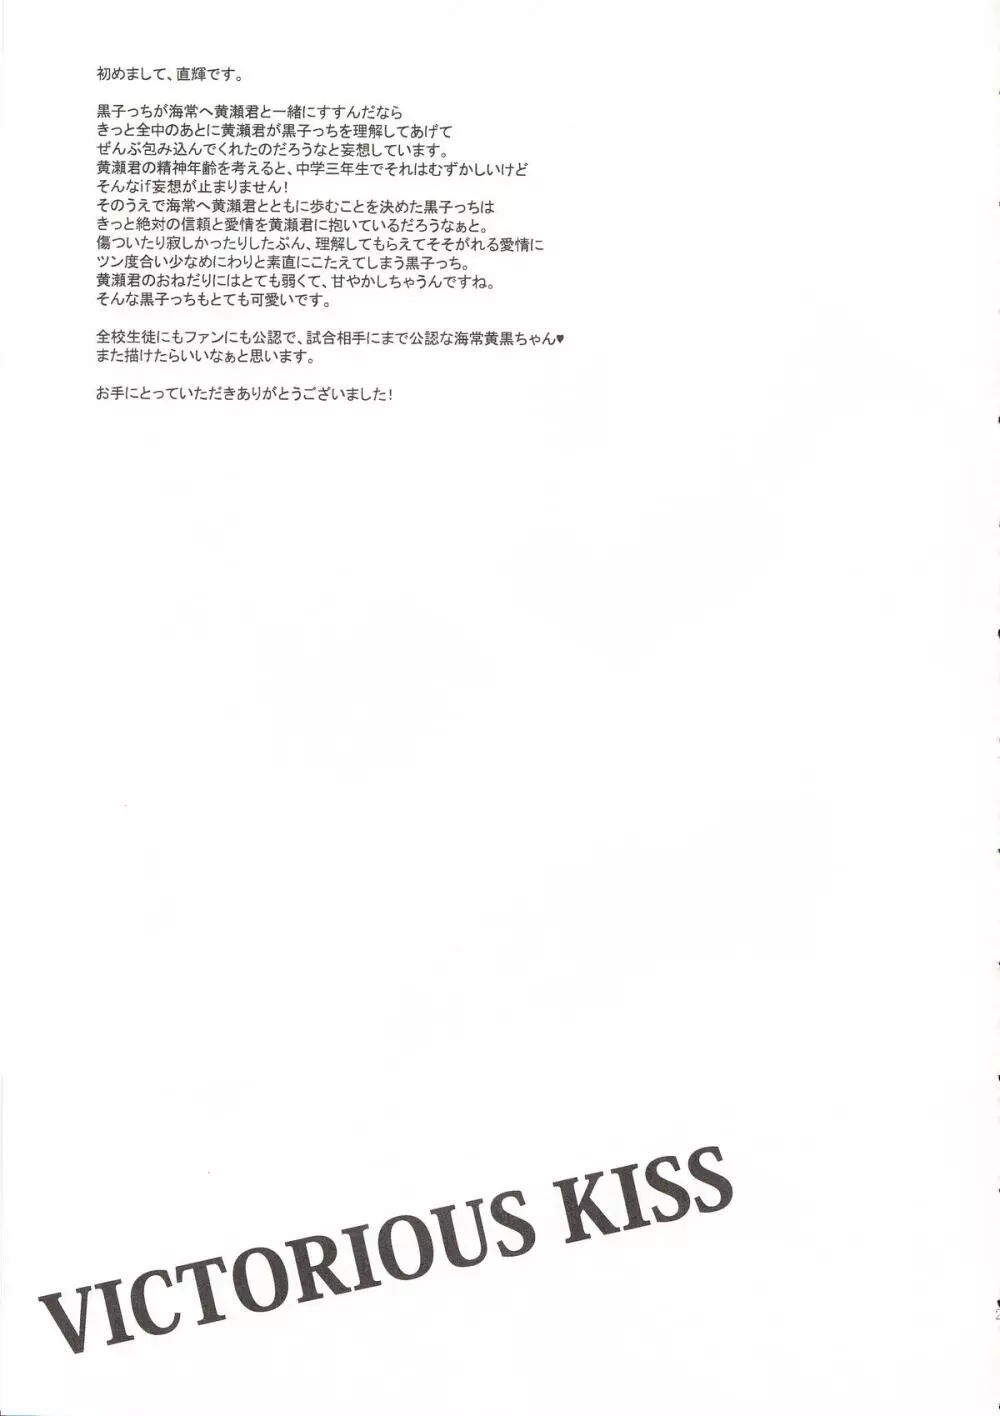 VICTORIOUS KISS 24ページ